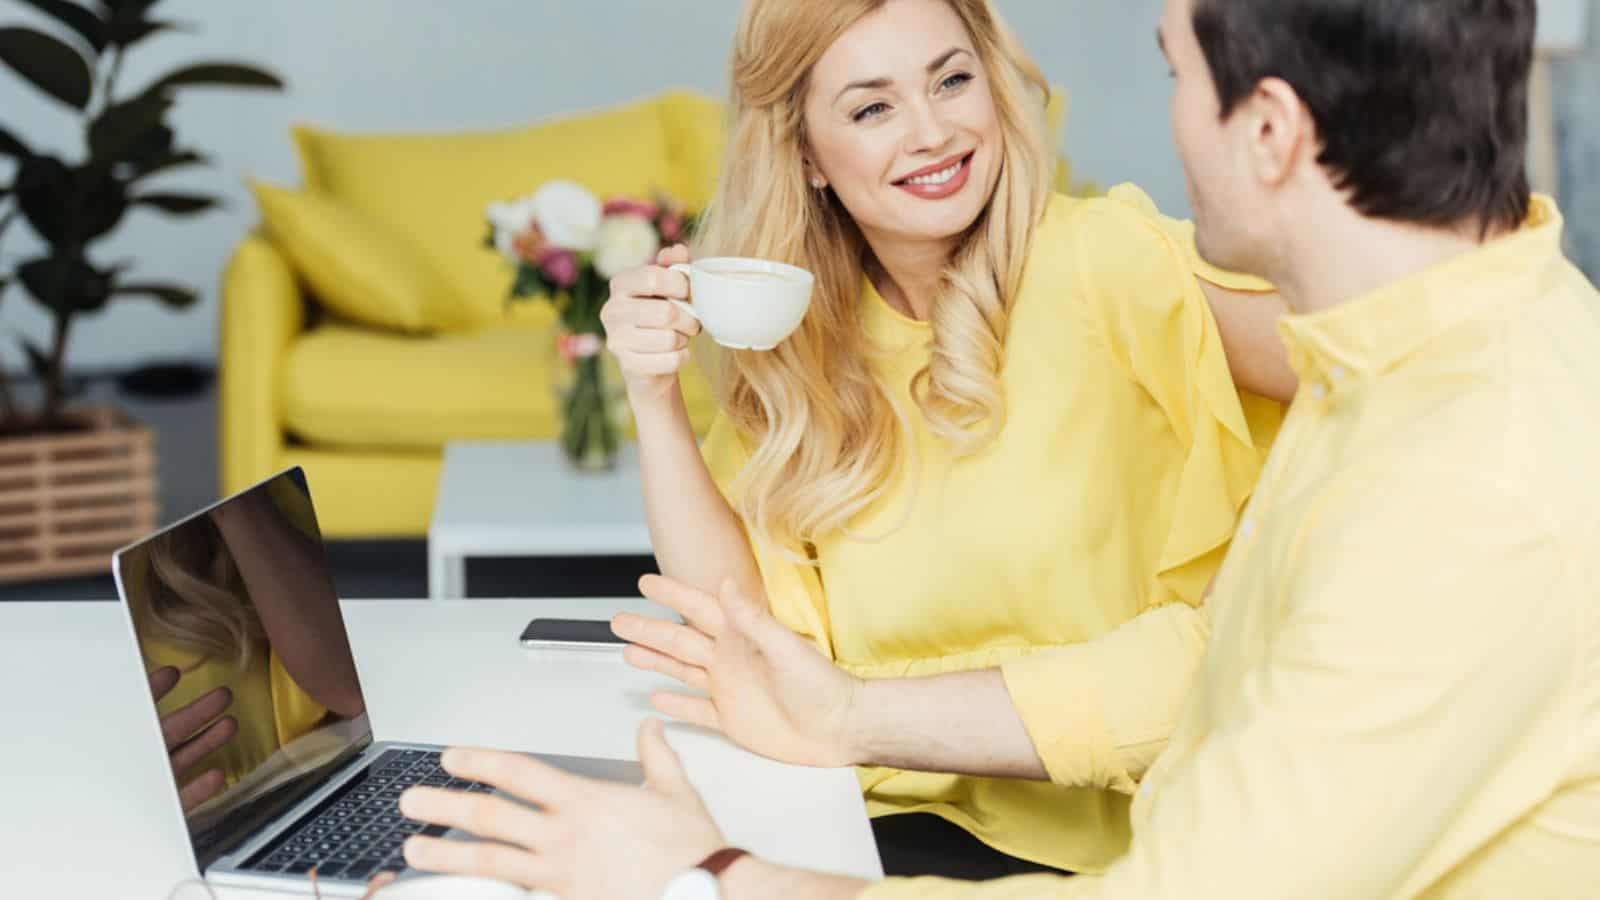 Man and woman drinking coffee and working by laptop in kitchen